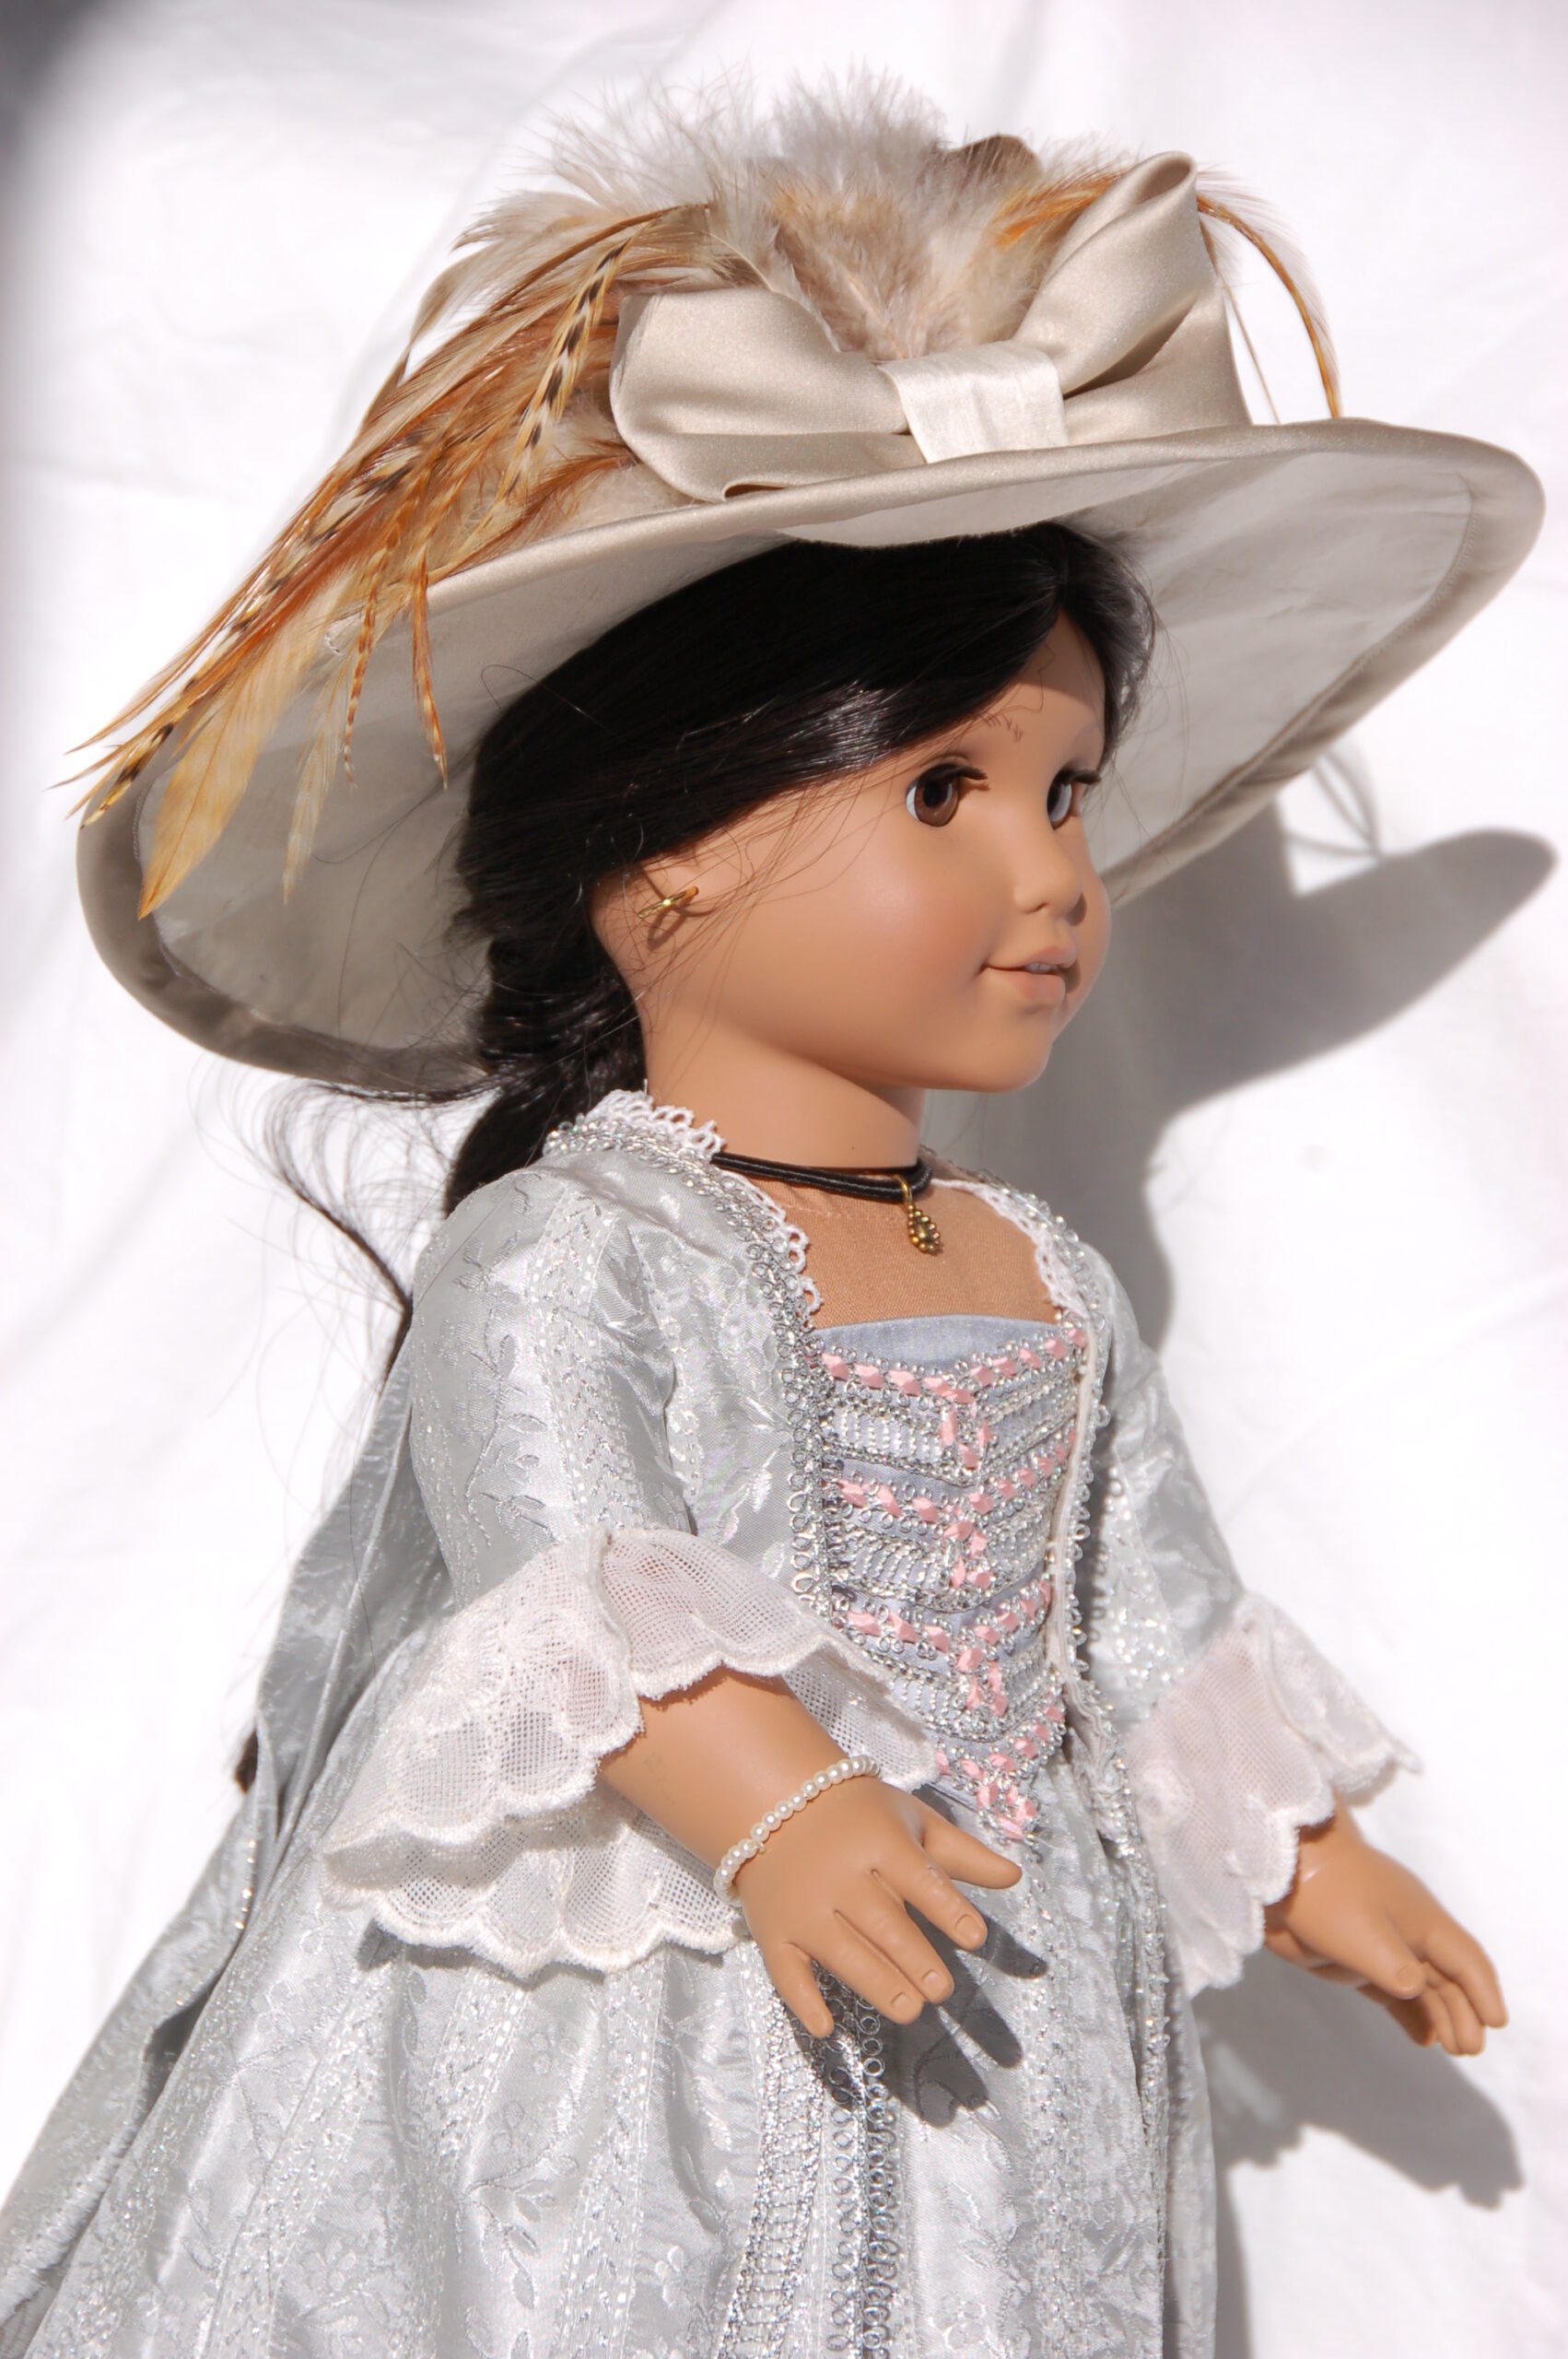 American girl doll wearing a silver robe francaise with a large gainsborough hat